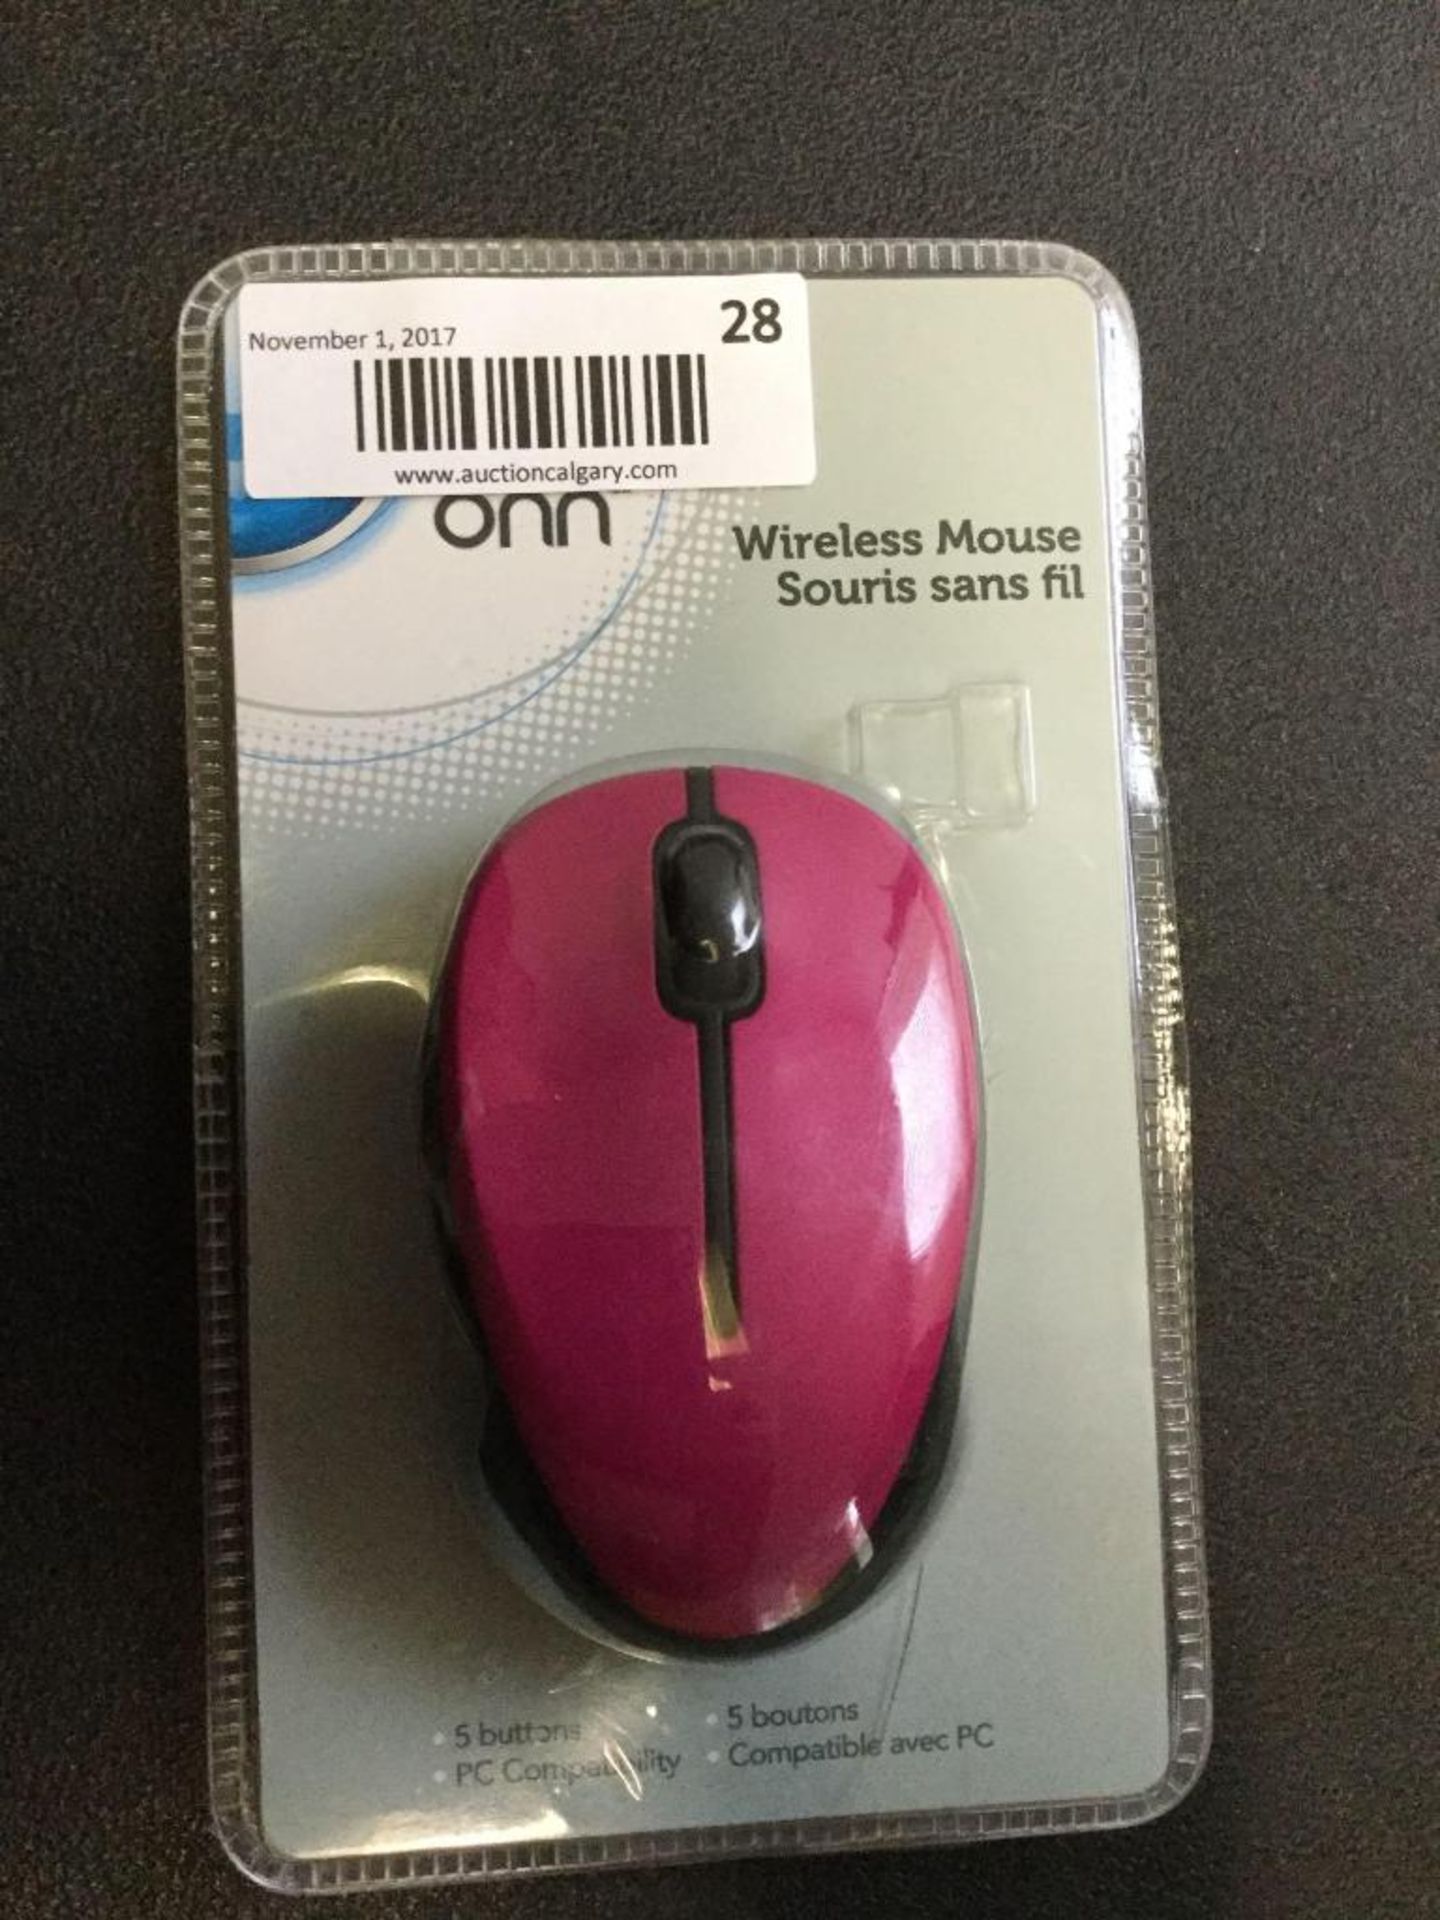 Onn Wireless mouse 5 button and PC Compatible - Image 2 of 2